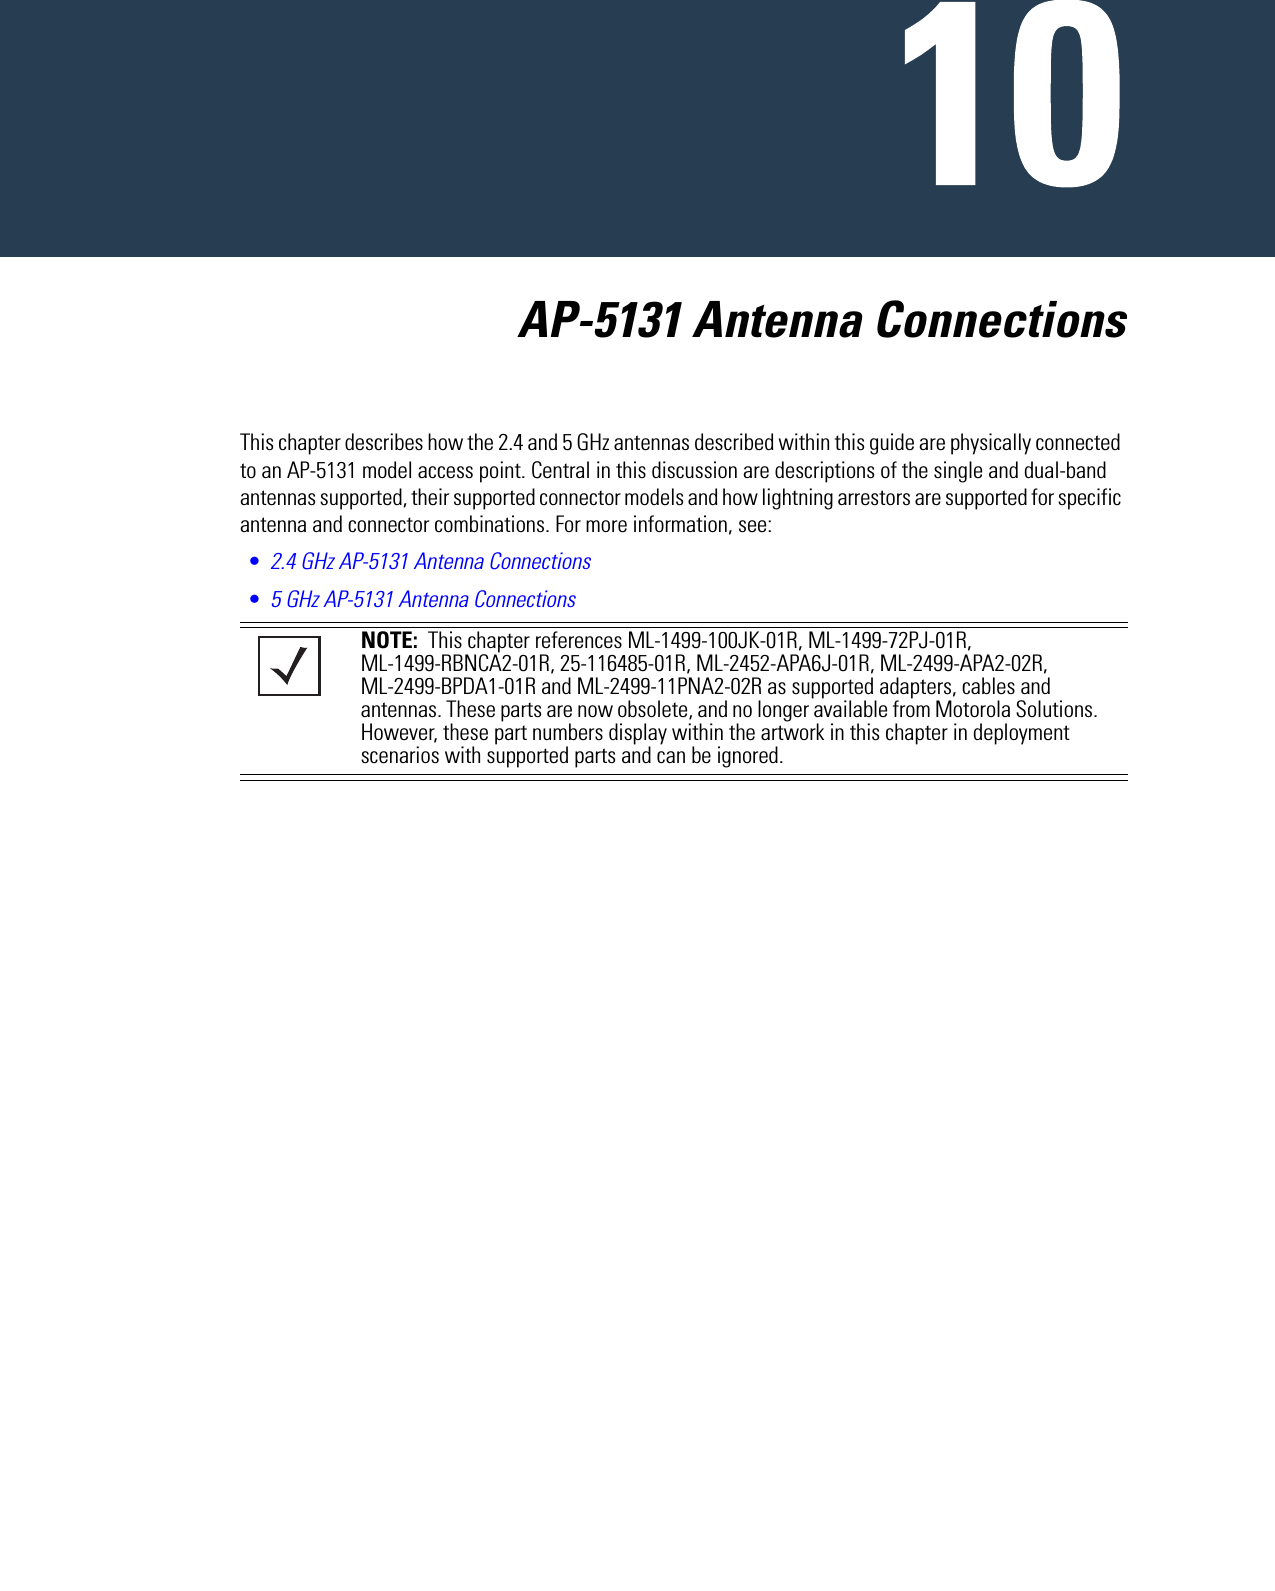   AP-5131 Antenna ConnectionsThis chapter describes how the 2.4 and 5 GHz antennas described within this guide are physically connected to an AP-5131 model access point. Central in this discussion are descriptions of the single and dual-band antennas supported, their supported connector models and how lightning arrestors are supported for specific antenna and connector combinations. For more information, see:•2.4 GHz AP-5131 Antenna Connections•5 GHz AP-5131 Antenna Connections NOTE:  This chapter references ML-1499-100JK-01R, ML-1499-72PJ-01R, ML-1499-RBNCA2-01R, 25-116485-01R, ML-2452-APA6J-01R, ML-2499-APA2-02R, ML-2499-BPDA1-01R and ML-2499-11PNA2-02R as supported adapters, cables and antennas. These parts are now obsolete, and no longer available from Motorola Solutions. However, these part numbers display within the artwork in this chapter in deployment scenarios with supported parts and can be ignored.